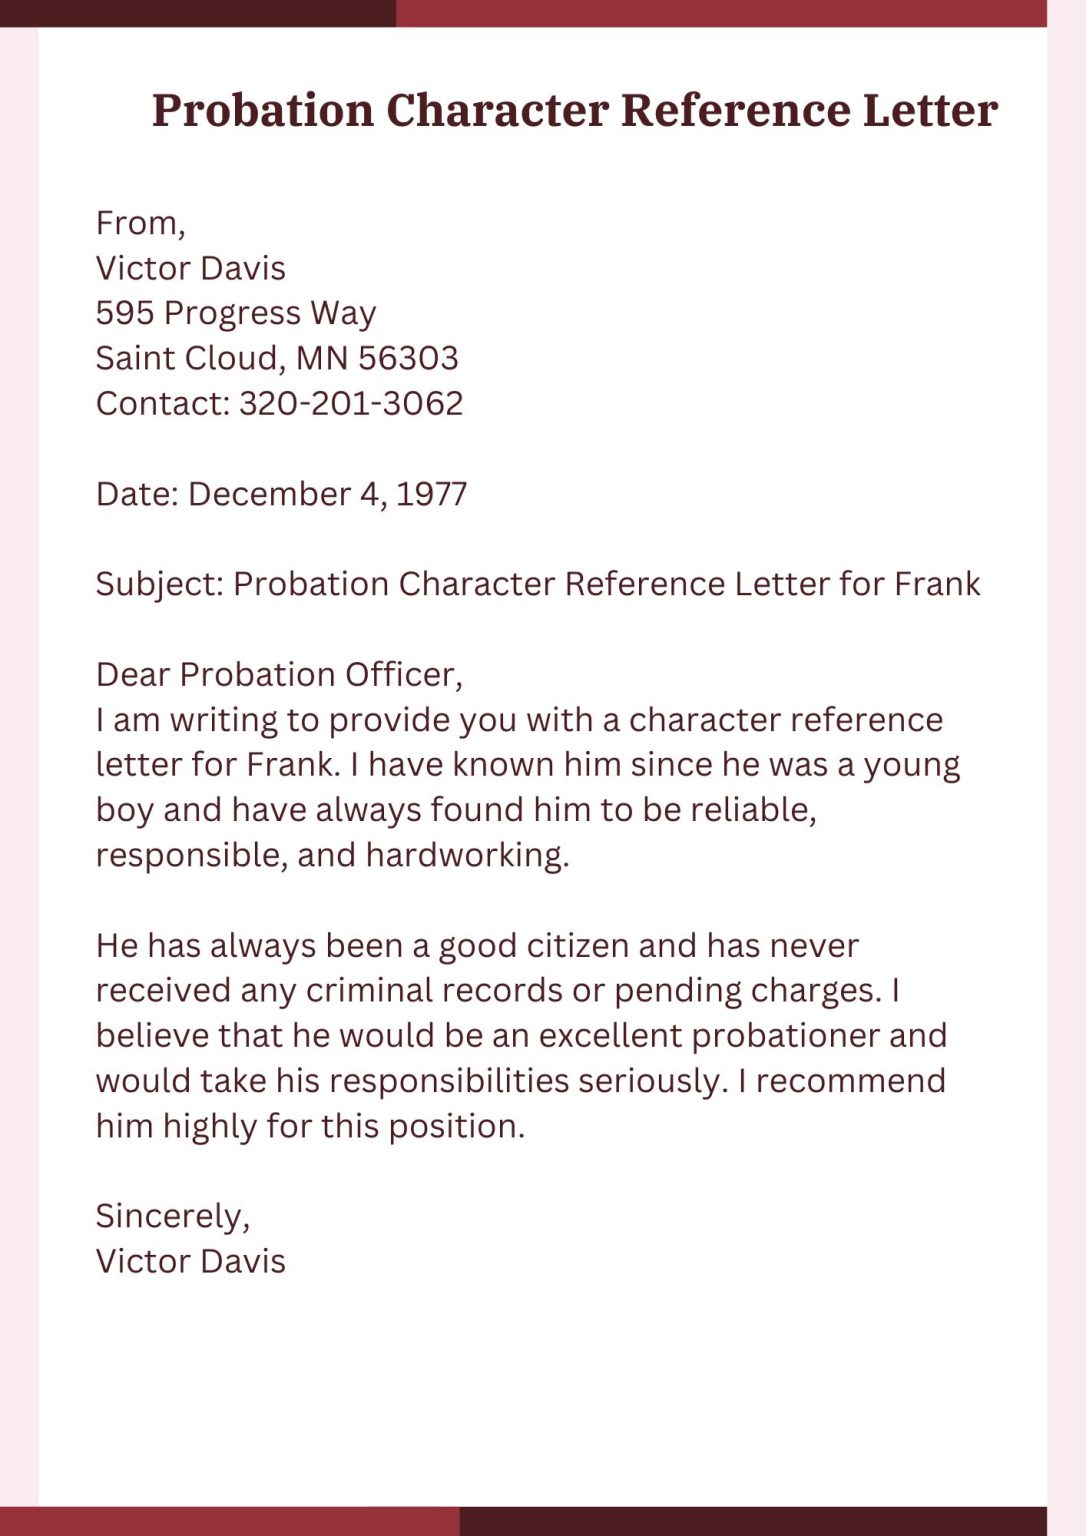 Probation Character Reference Letter Templates in PDF